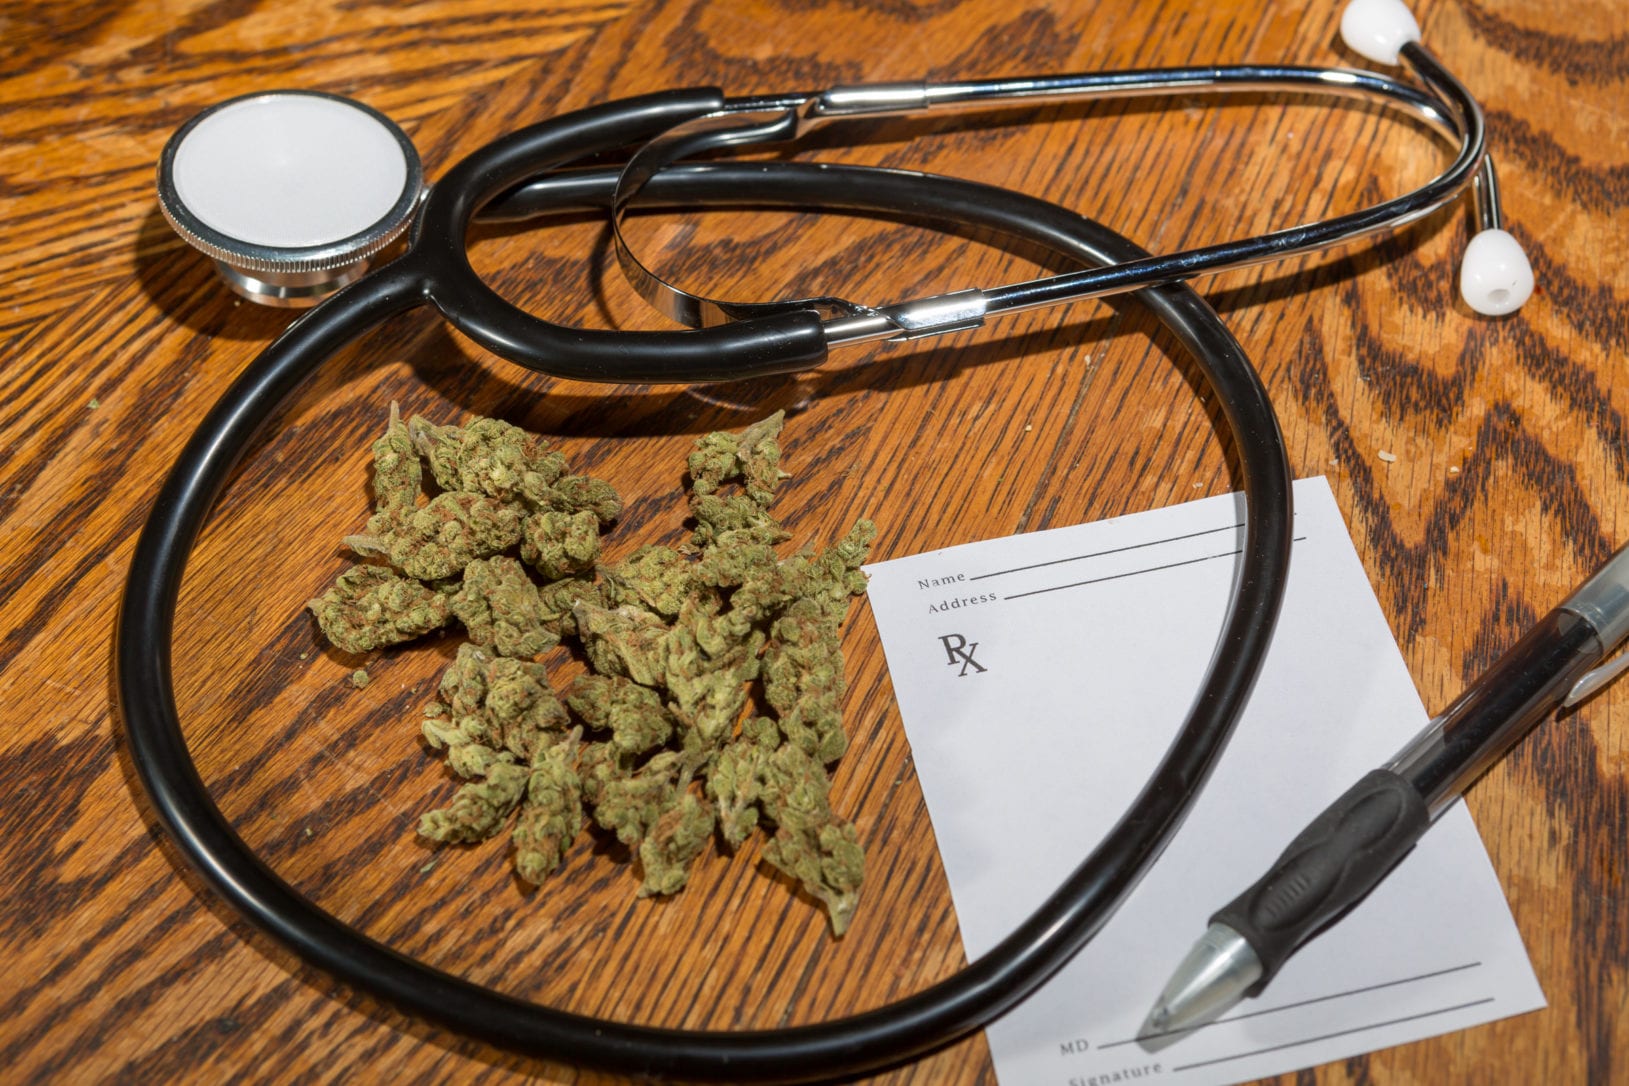 Legal Medical Marijuana Tied To Lower Opioid Use, Another Study Finds